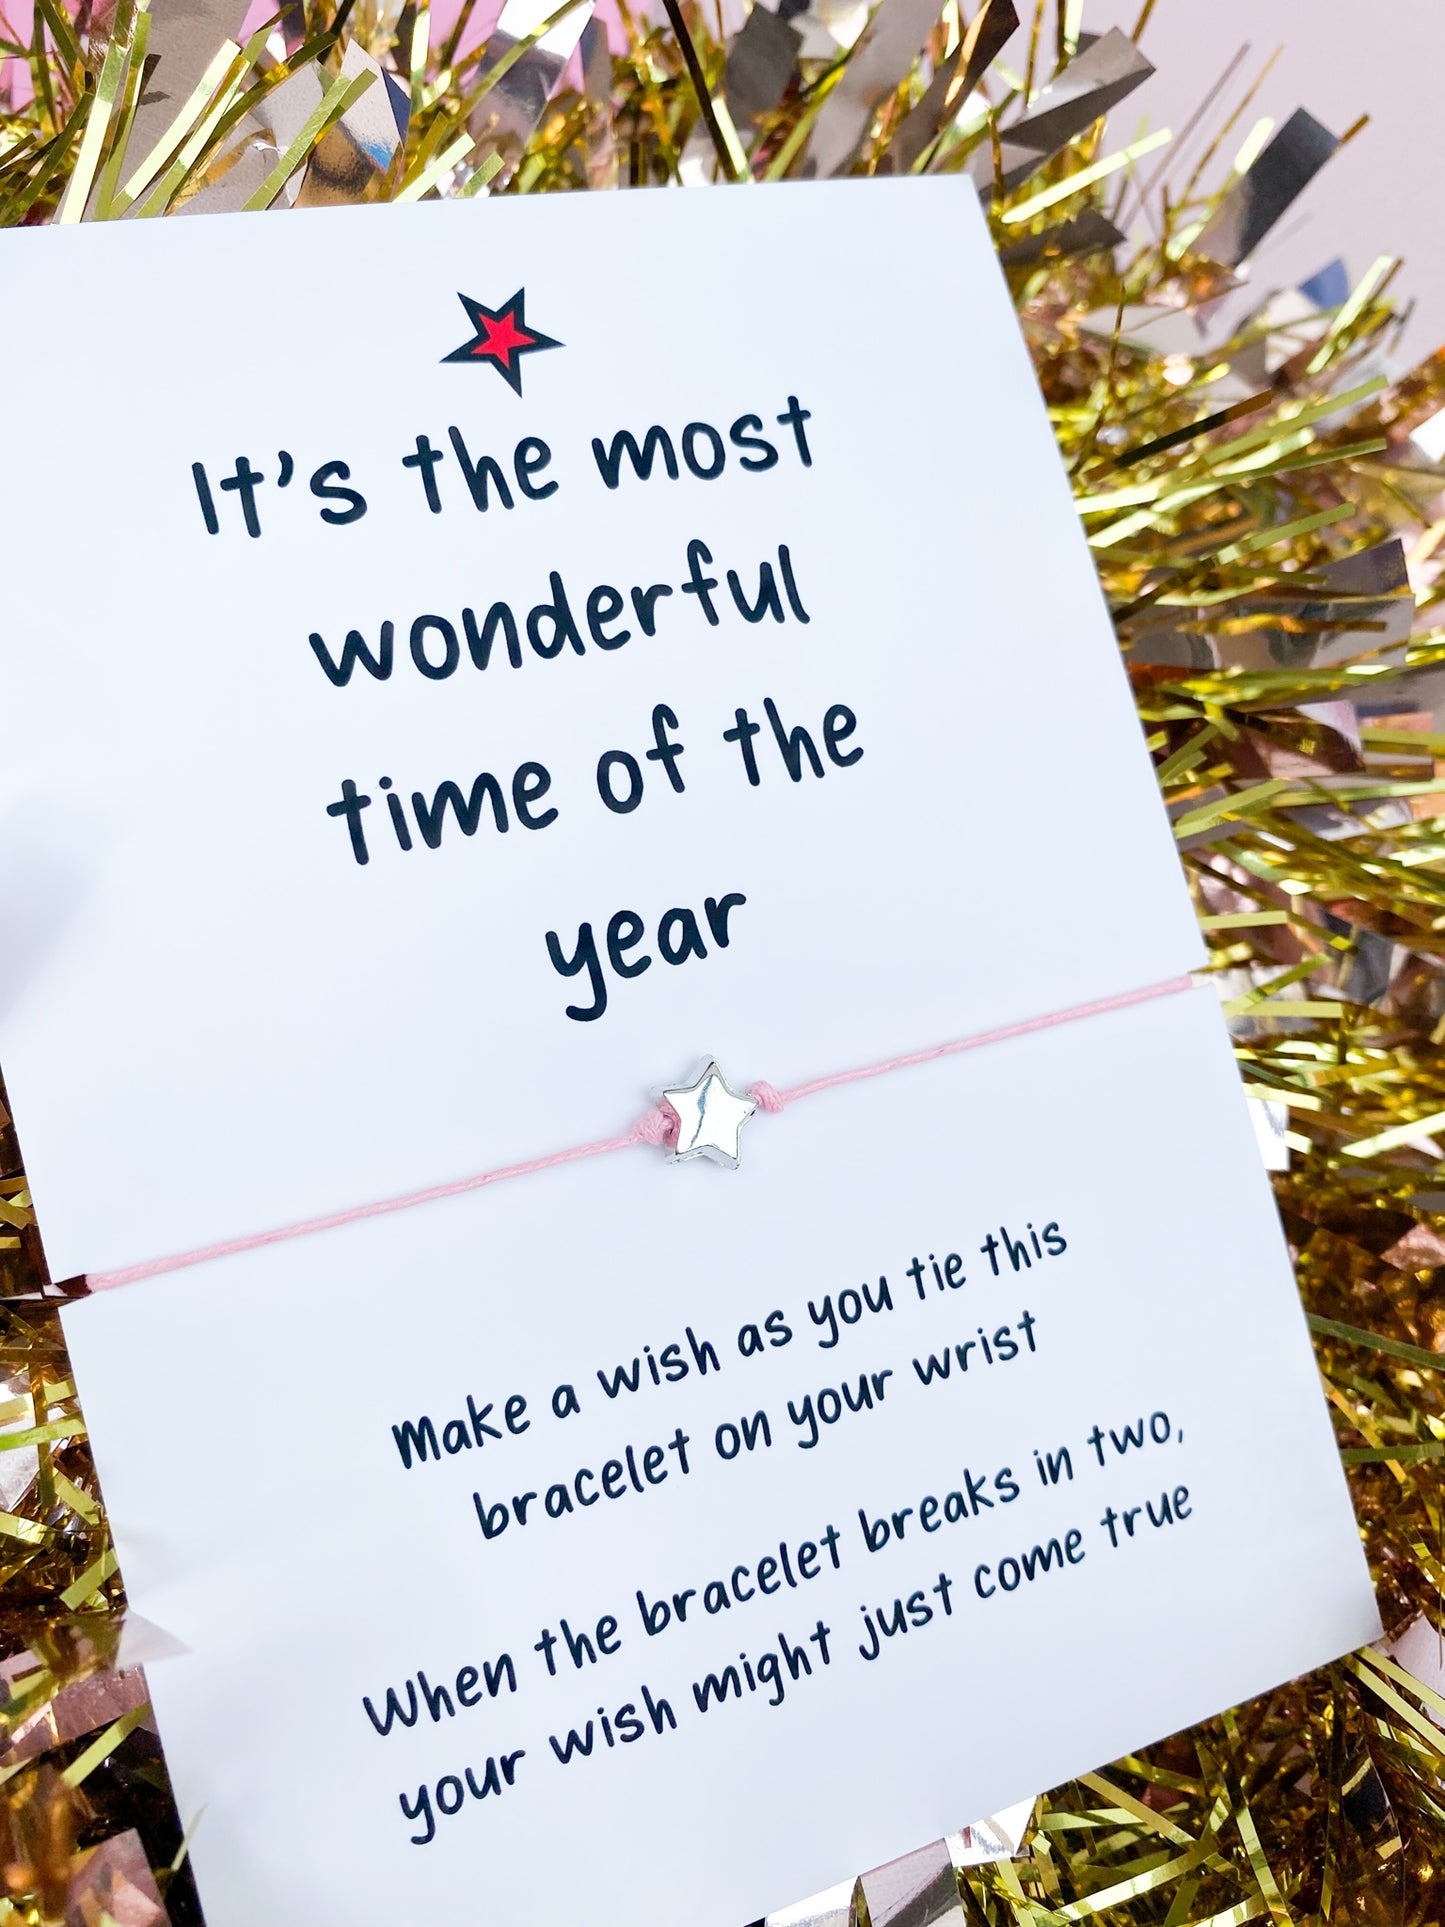 It's the most wonderful time | Merry Christmas Wish Bracelet